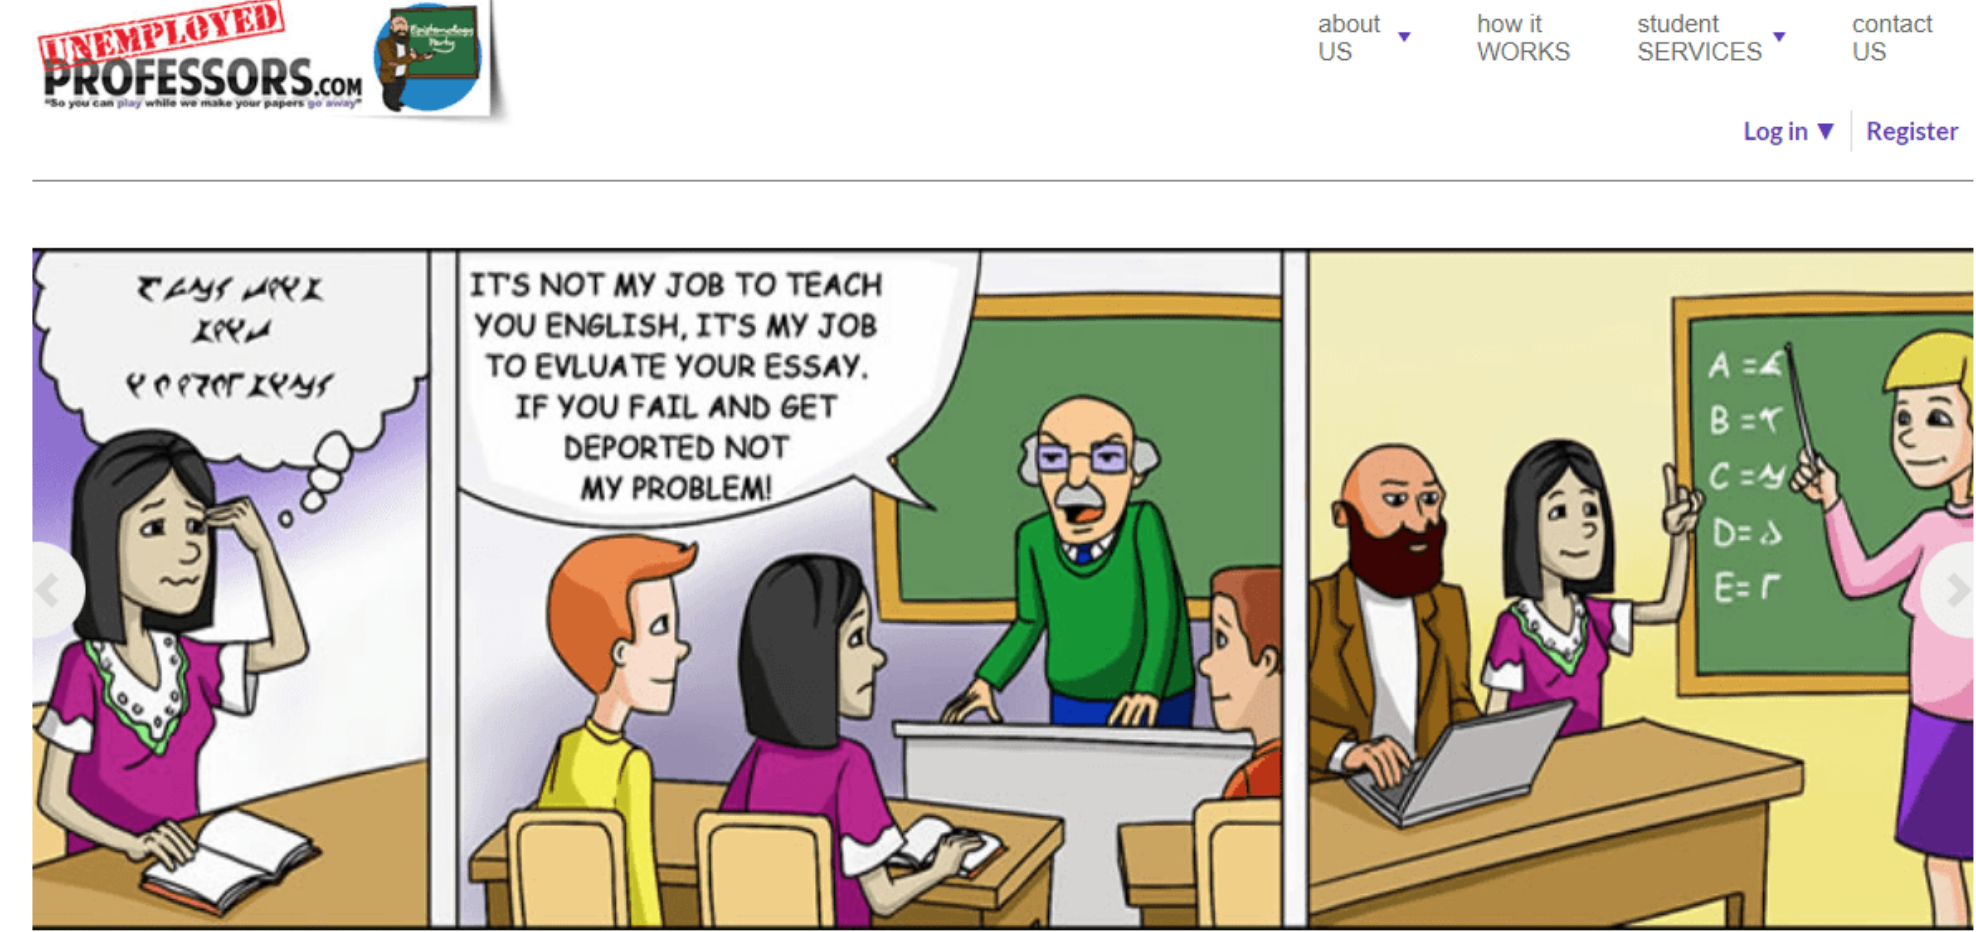 unemployed professors review